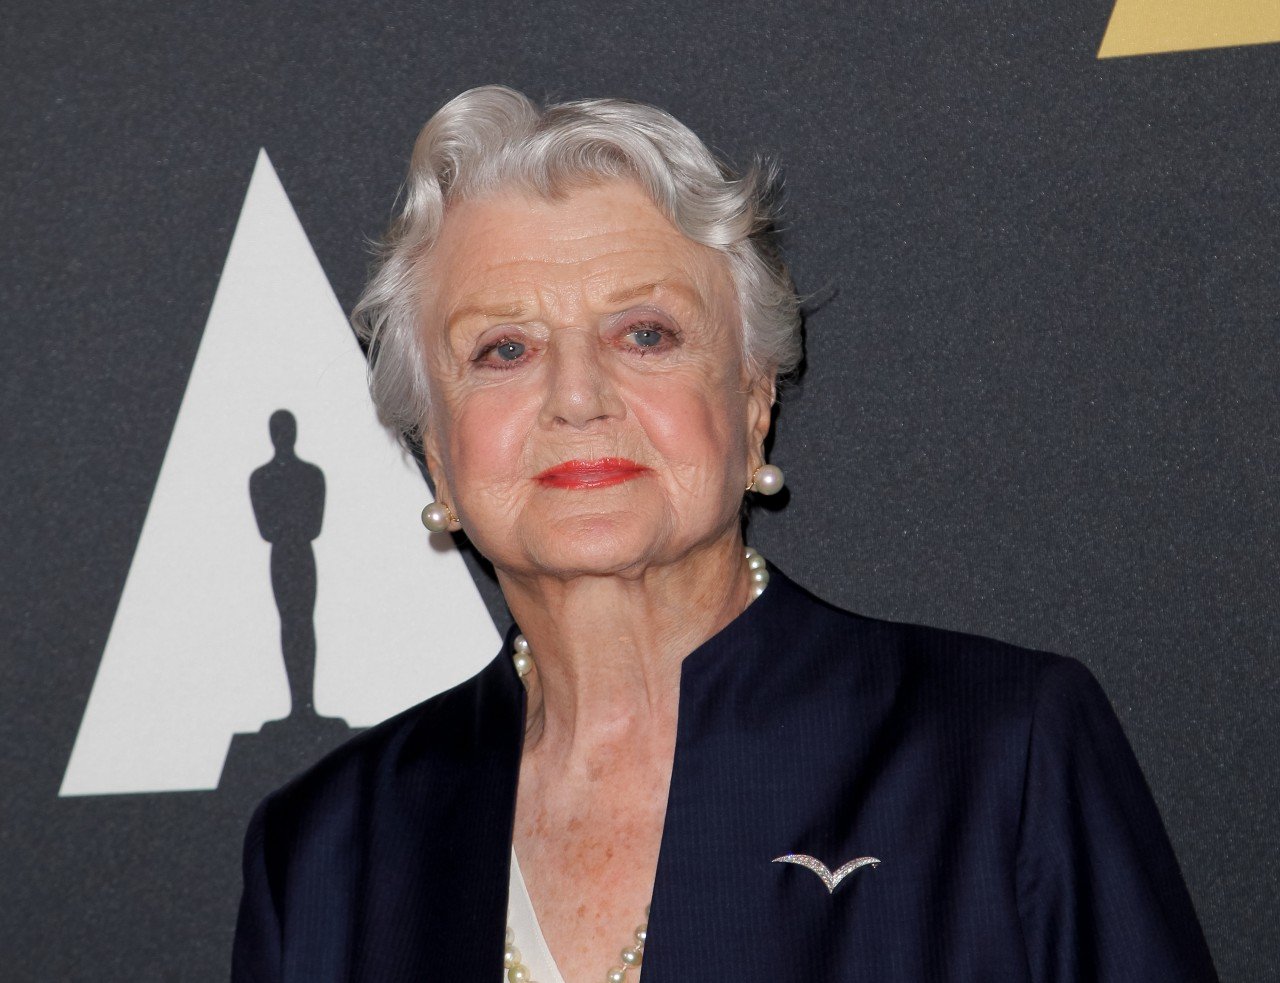 Angela Lansbury at the 25th anniversary screening of 'Beauty And the Beast' in 2016.